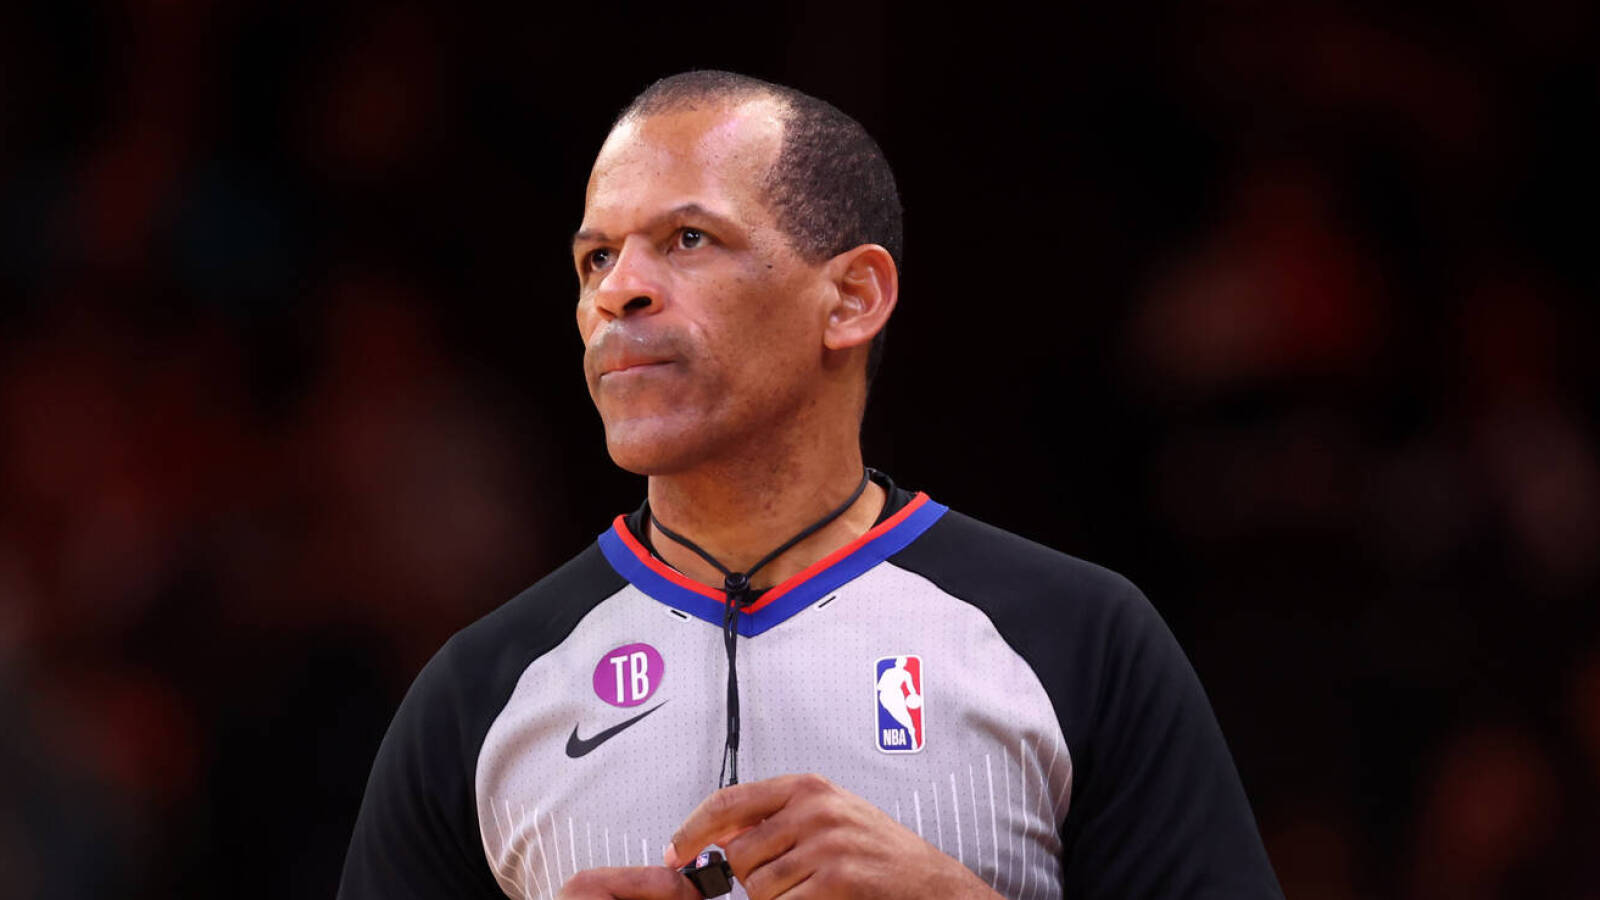 NBA curiously drops investigation of Eric Lewis after referee retires